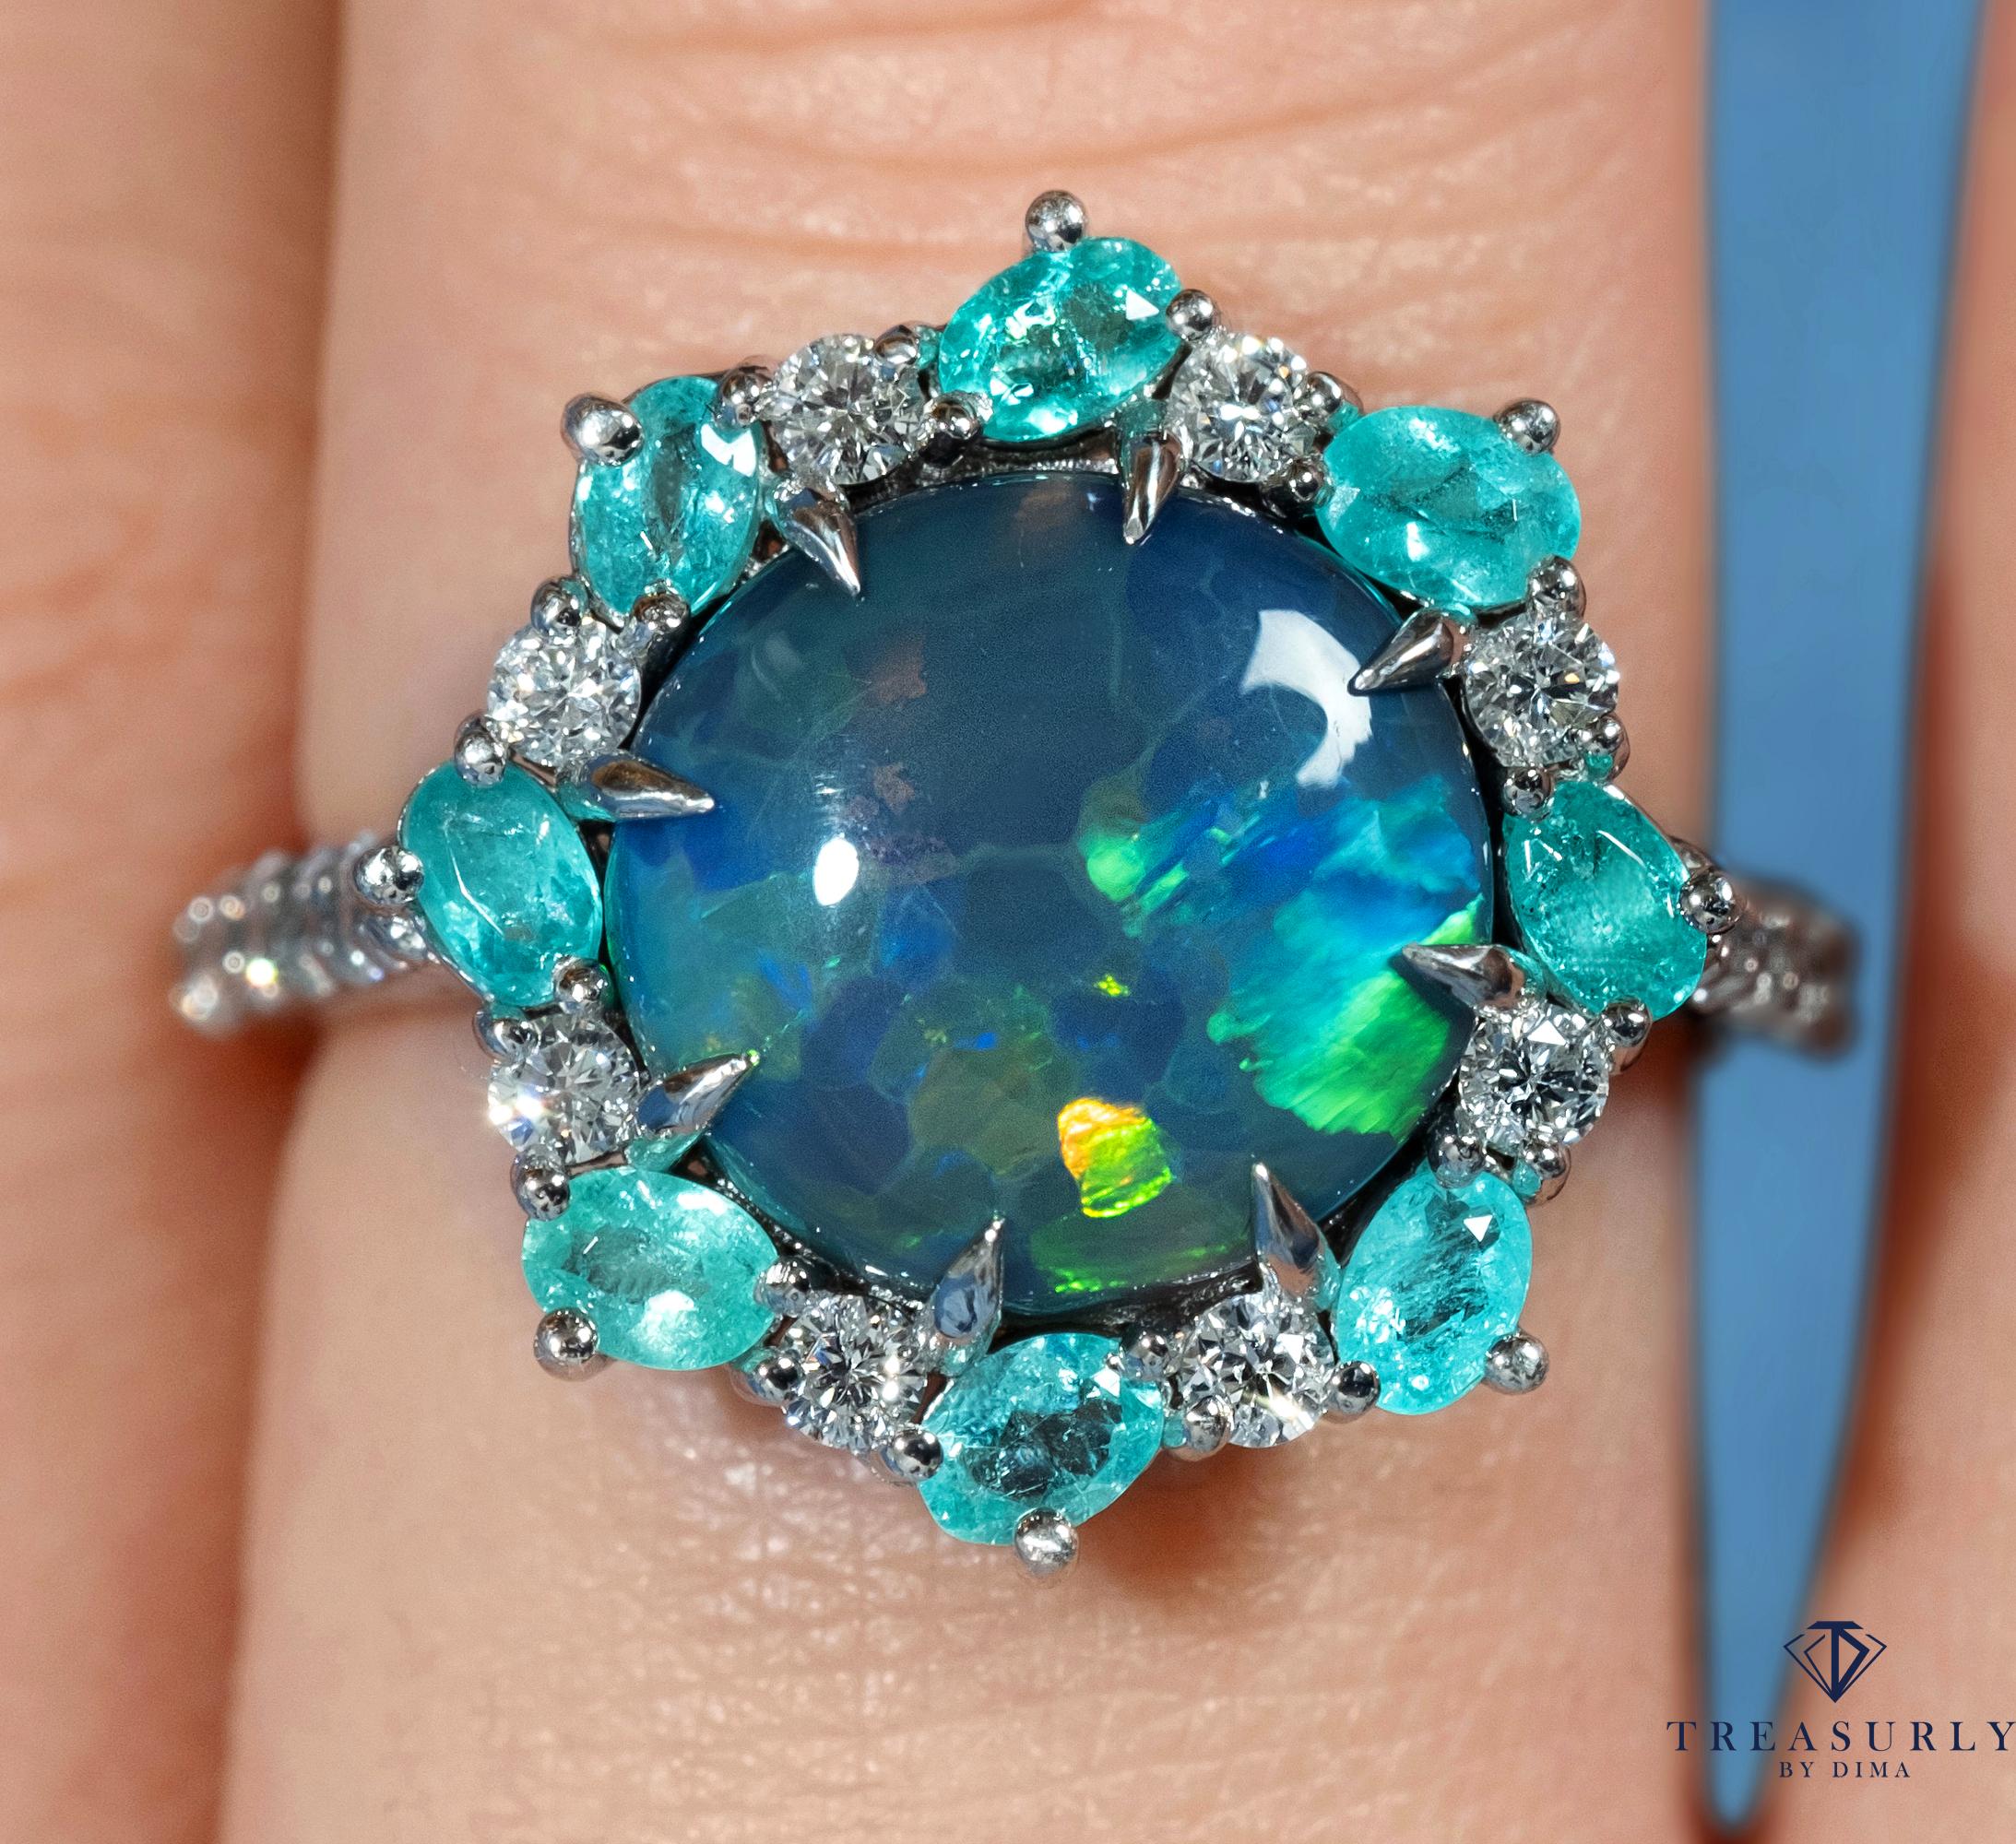 An Exquisite and Very Elegant Australian BLACK OPAL from the Lighting Ridge Mine, PARAIBA TOURMALINE and Diamond Cluster Platinum Ring.

Highly collectible the Center Opal is 2.55ct, measures 10.2 x 9.9 x 3.9mm. Body Tone 2N, Brilliance 4 on the